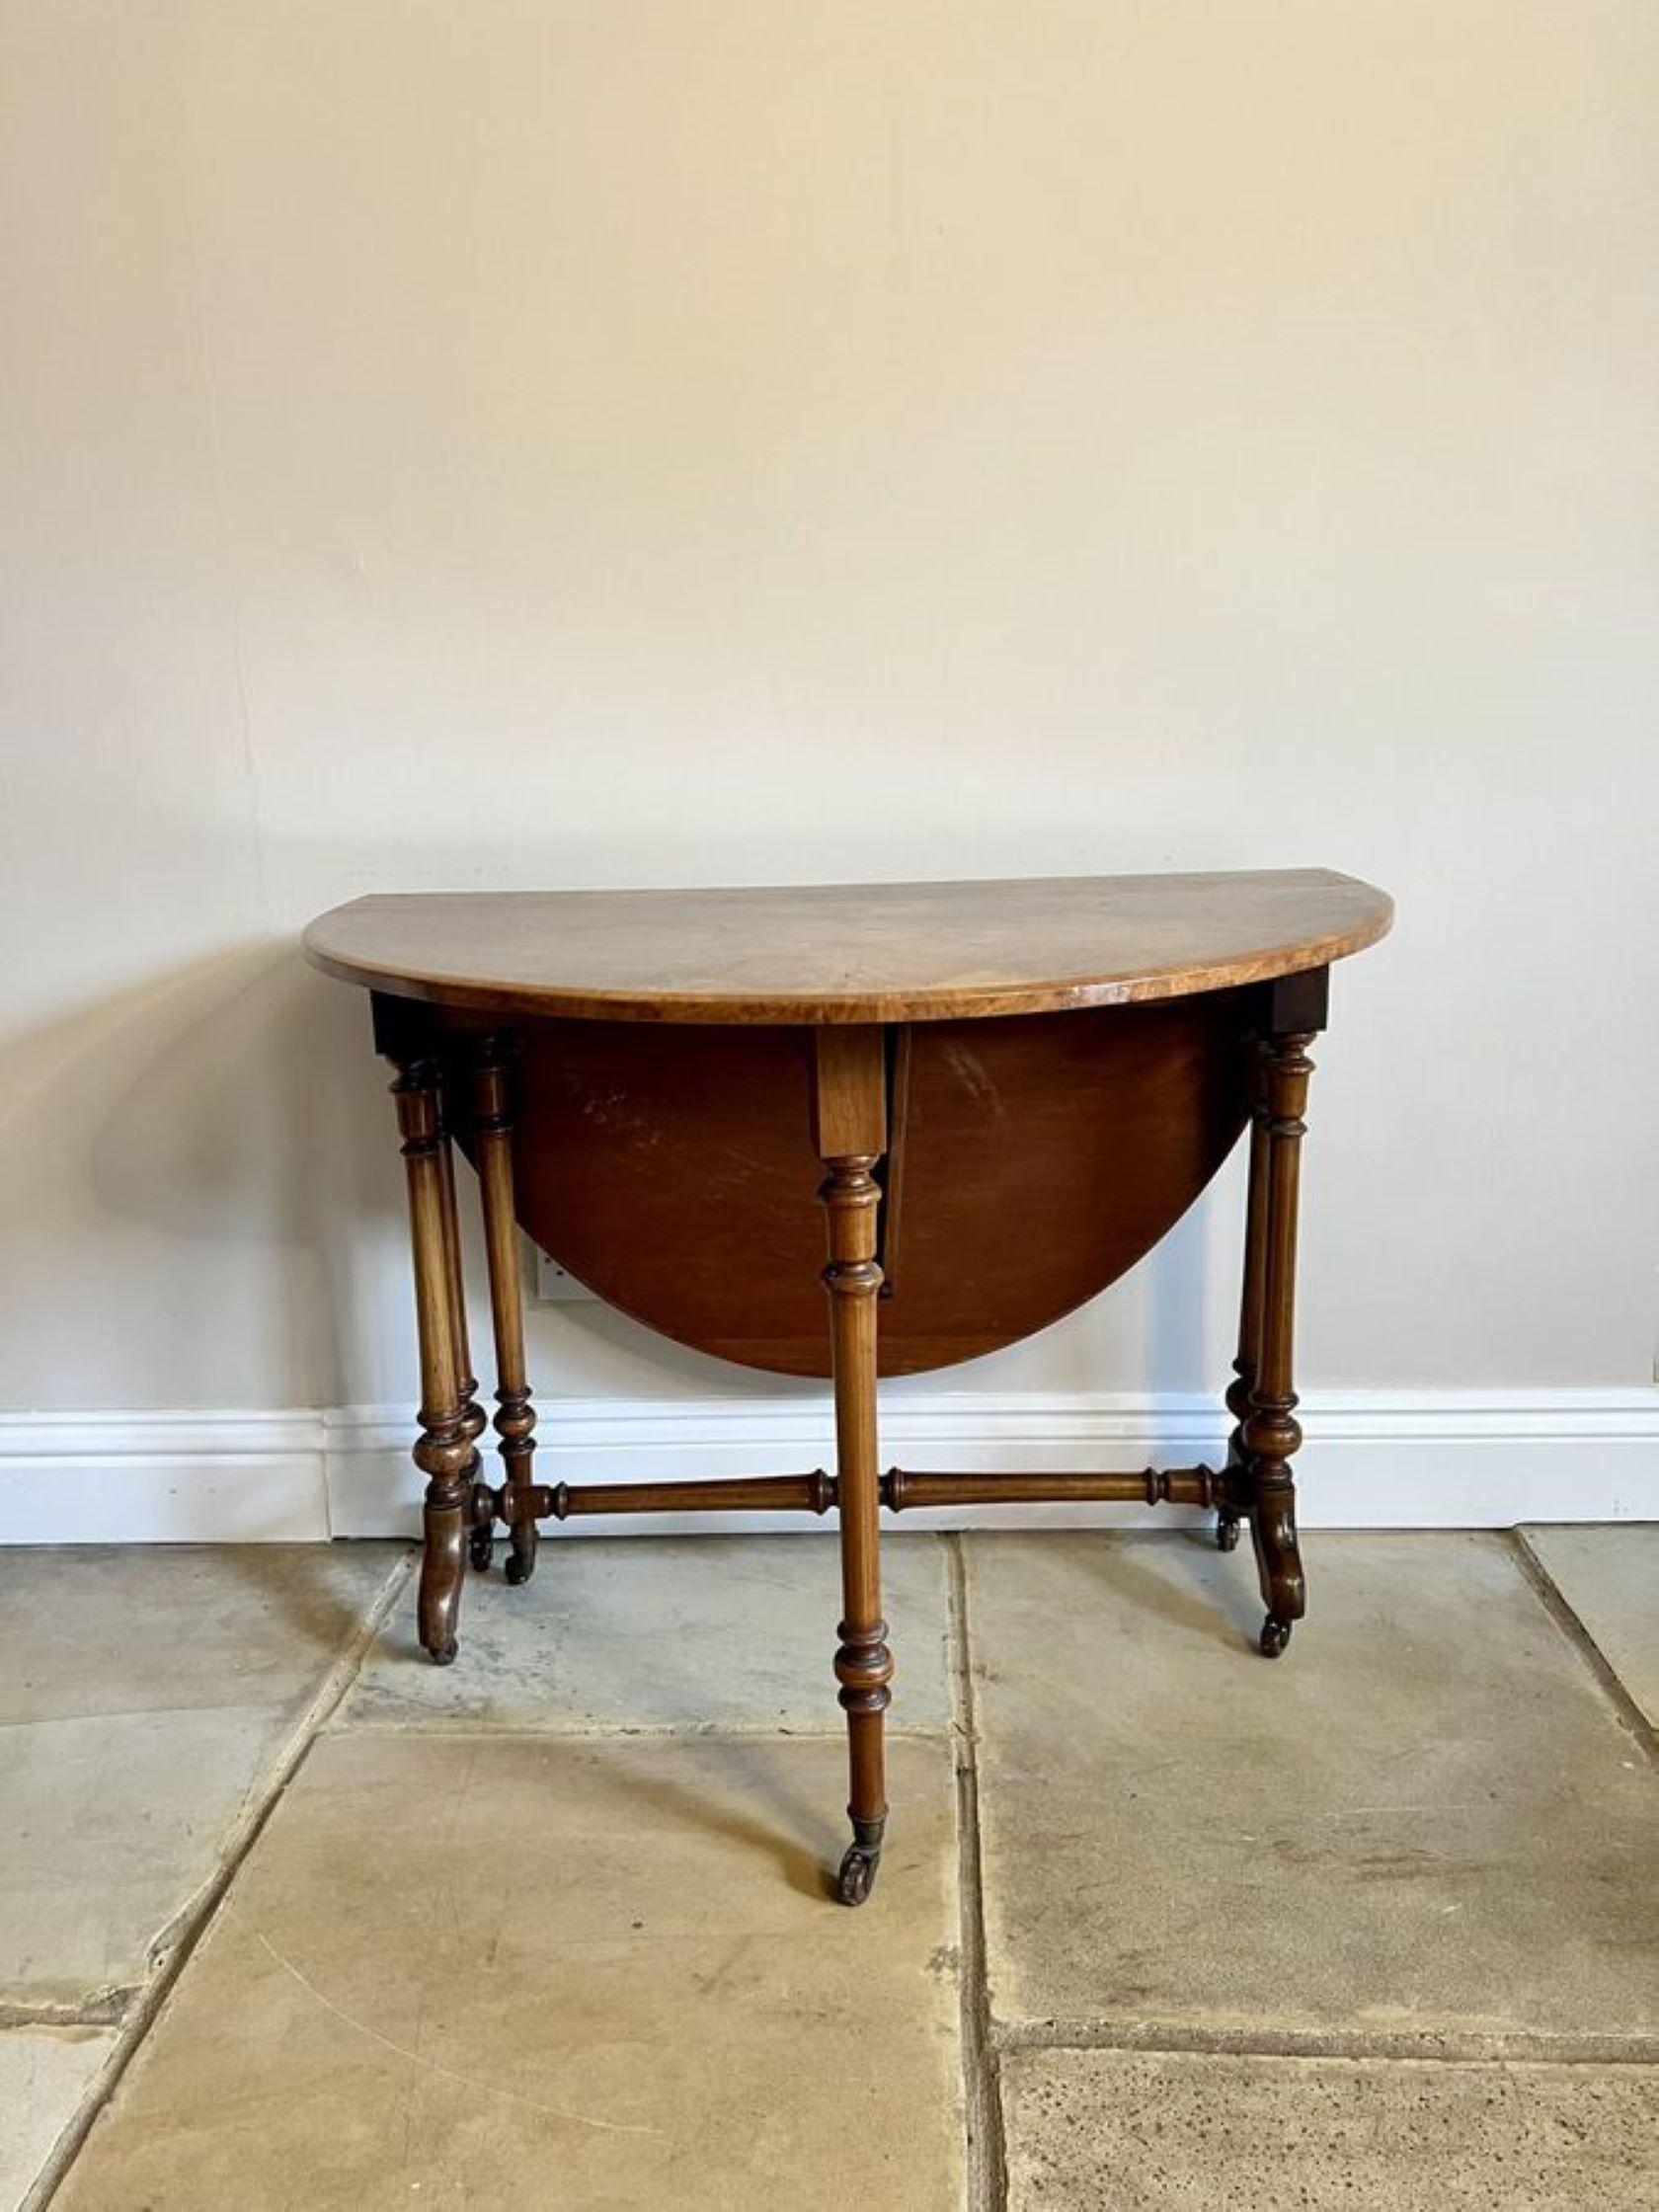 Antique Victorian quality burr walnut inlaid Sutherland table having a quality burr walnut inlaid oval top with two drop leaves and a moulded edge, supported by turned carved walnut columns swing out gate legs, standing on shaped carved cabriole